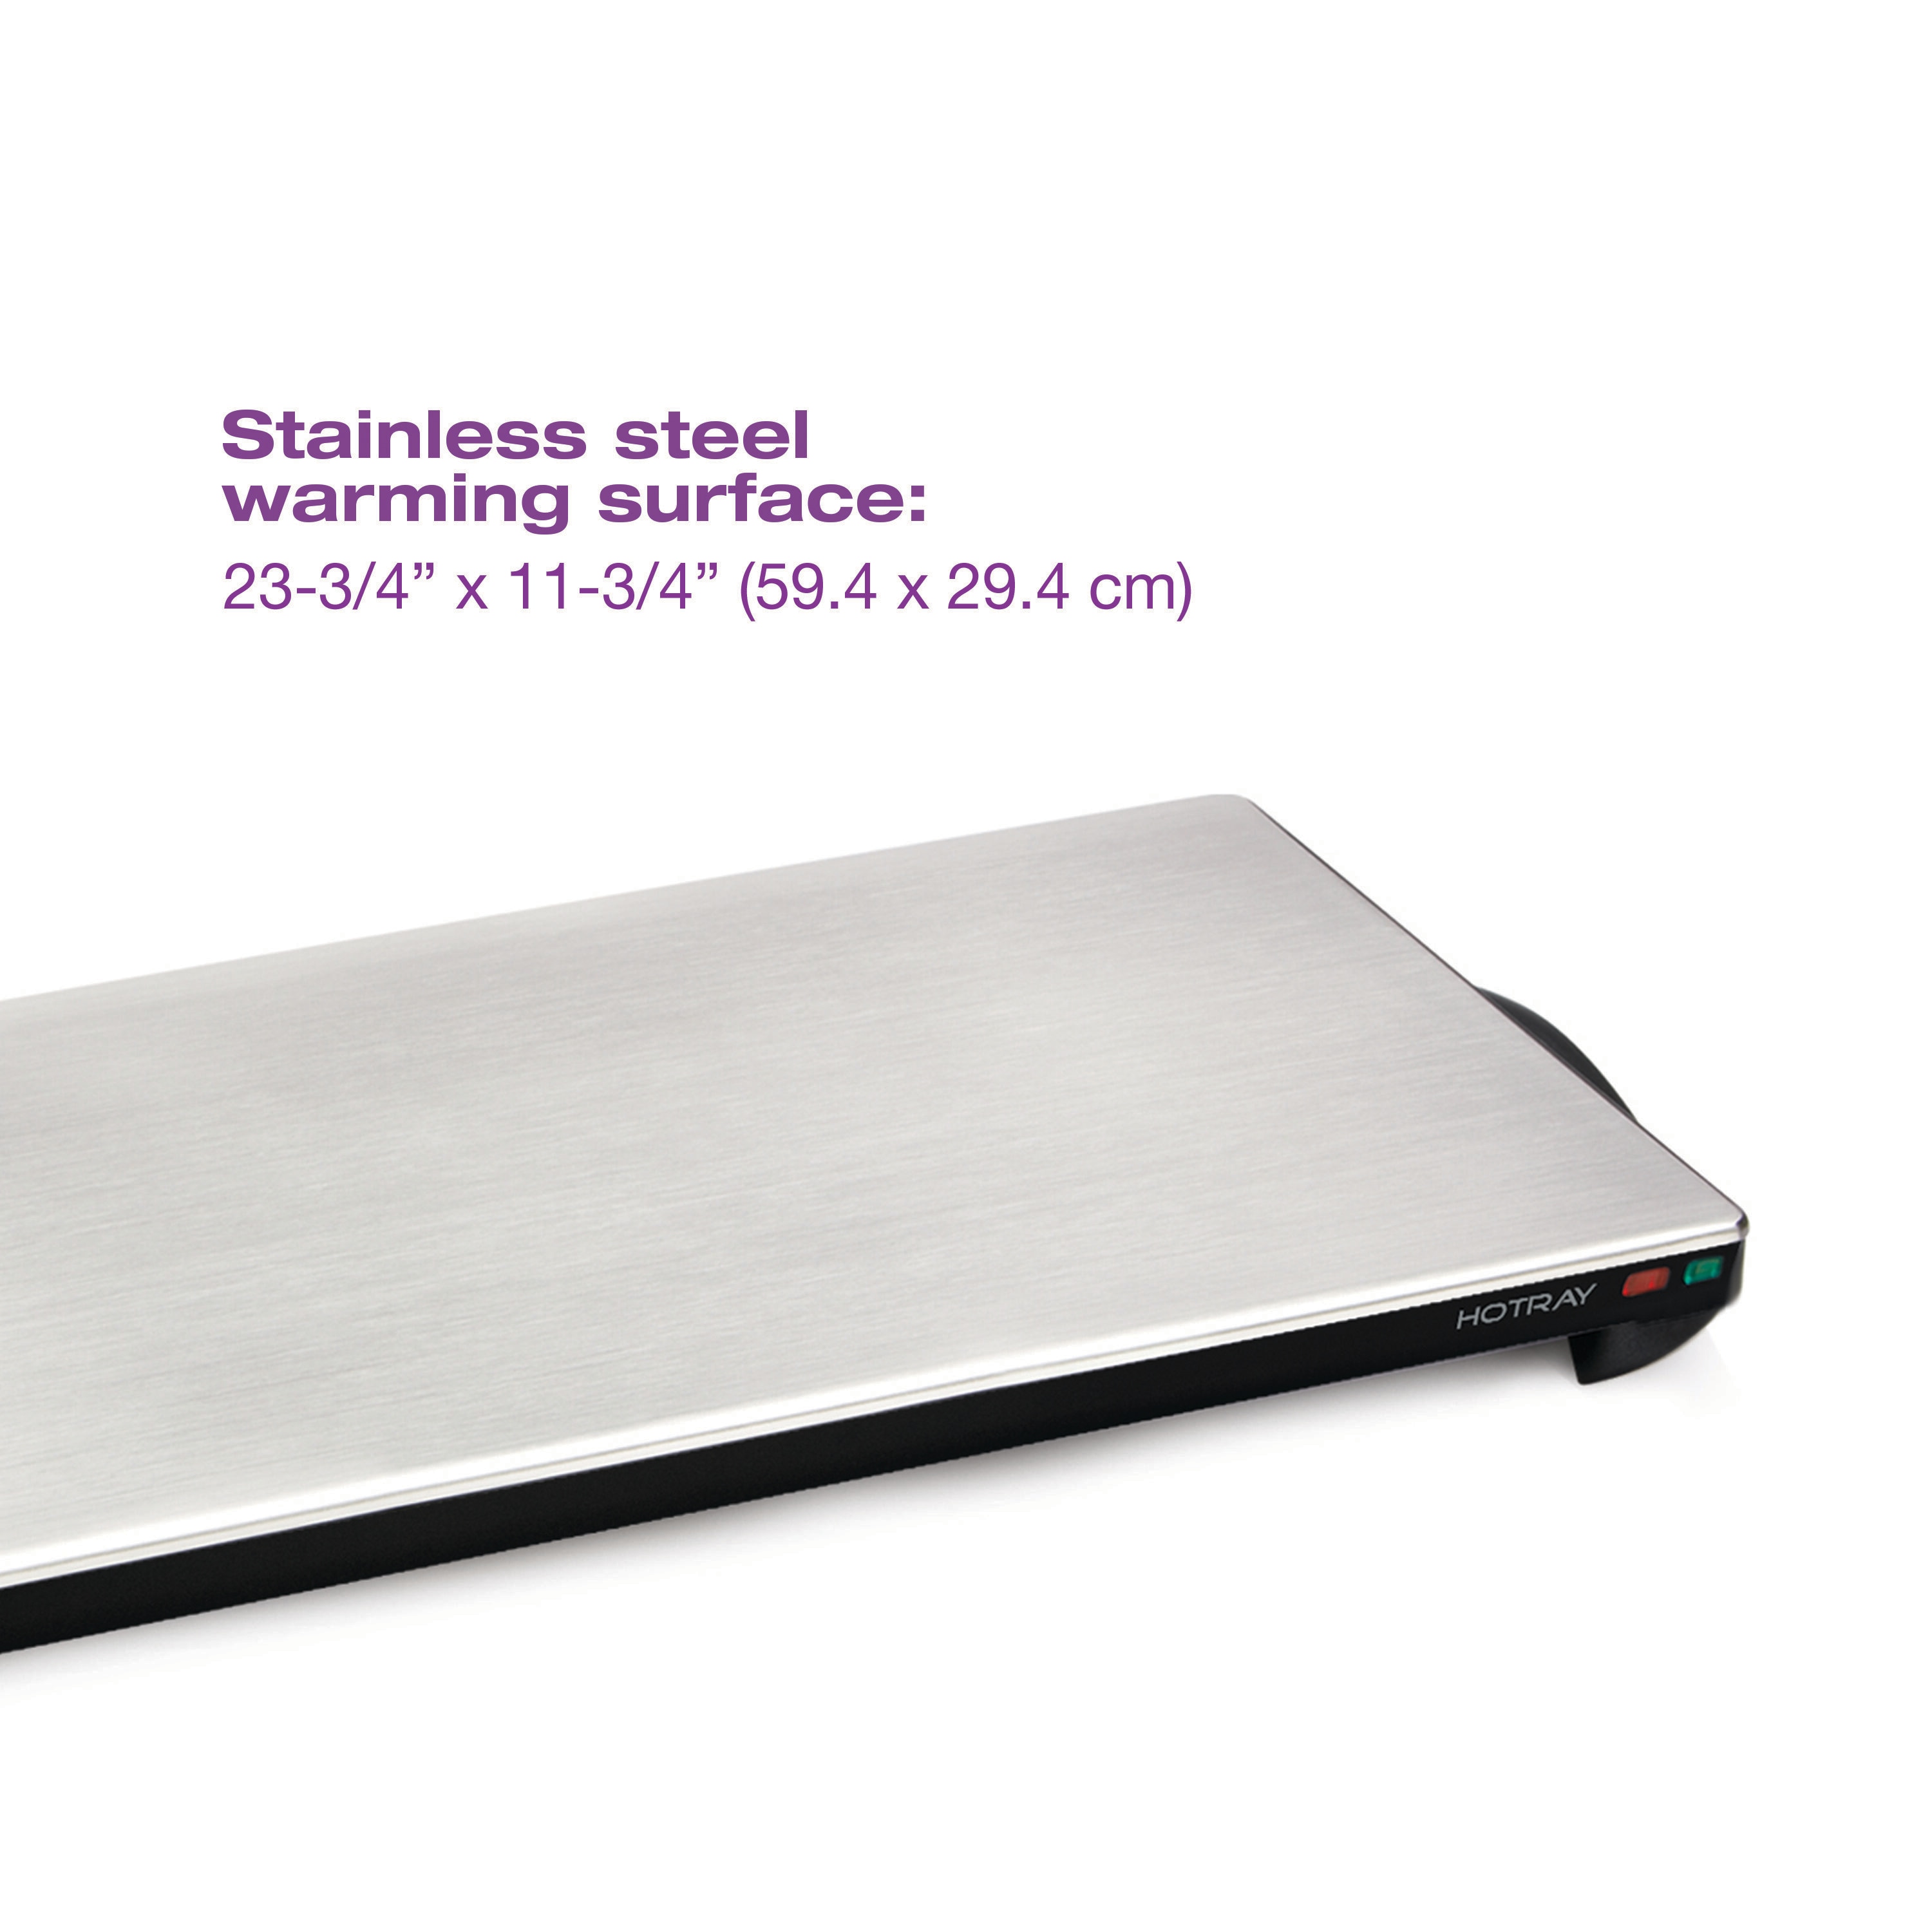 Cordless Hot Plate